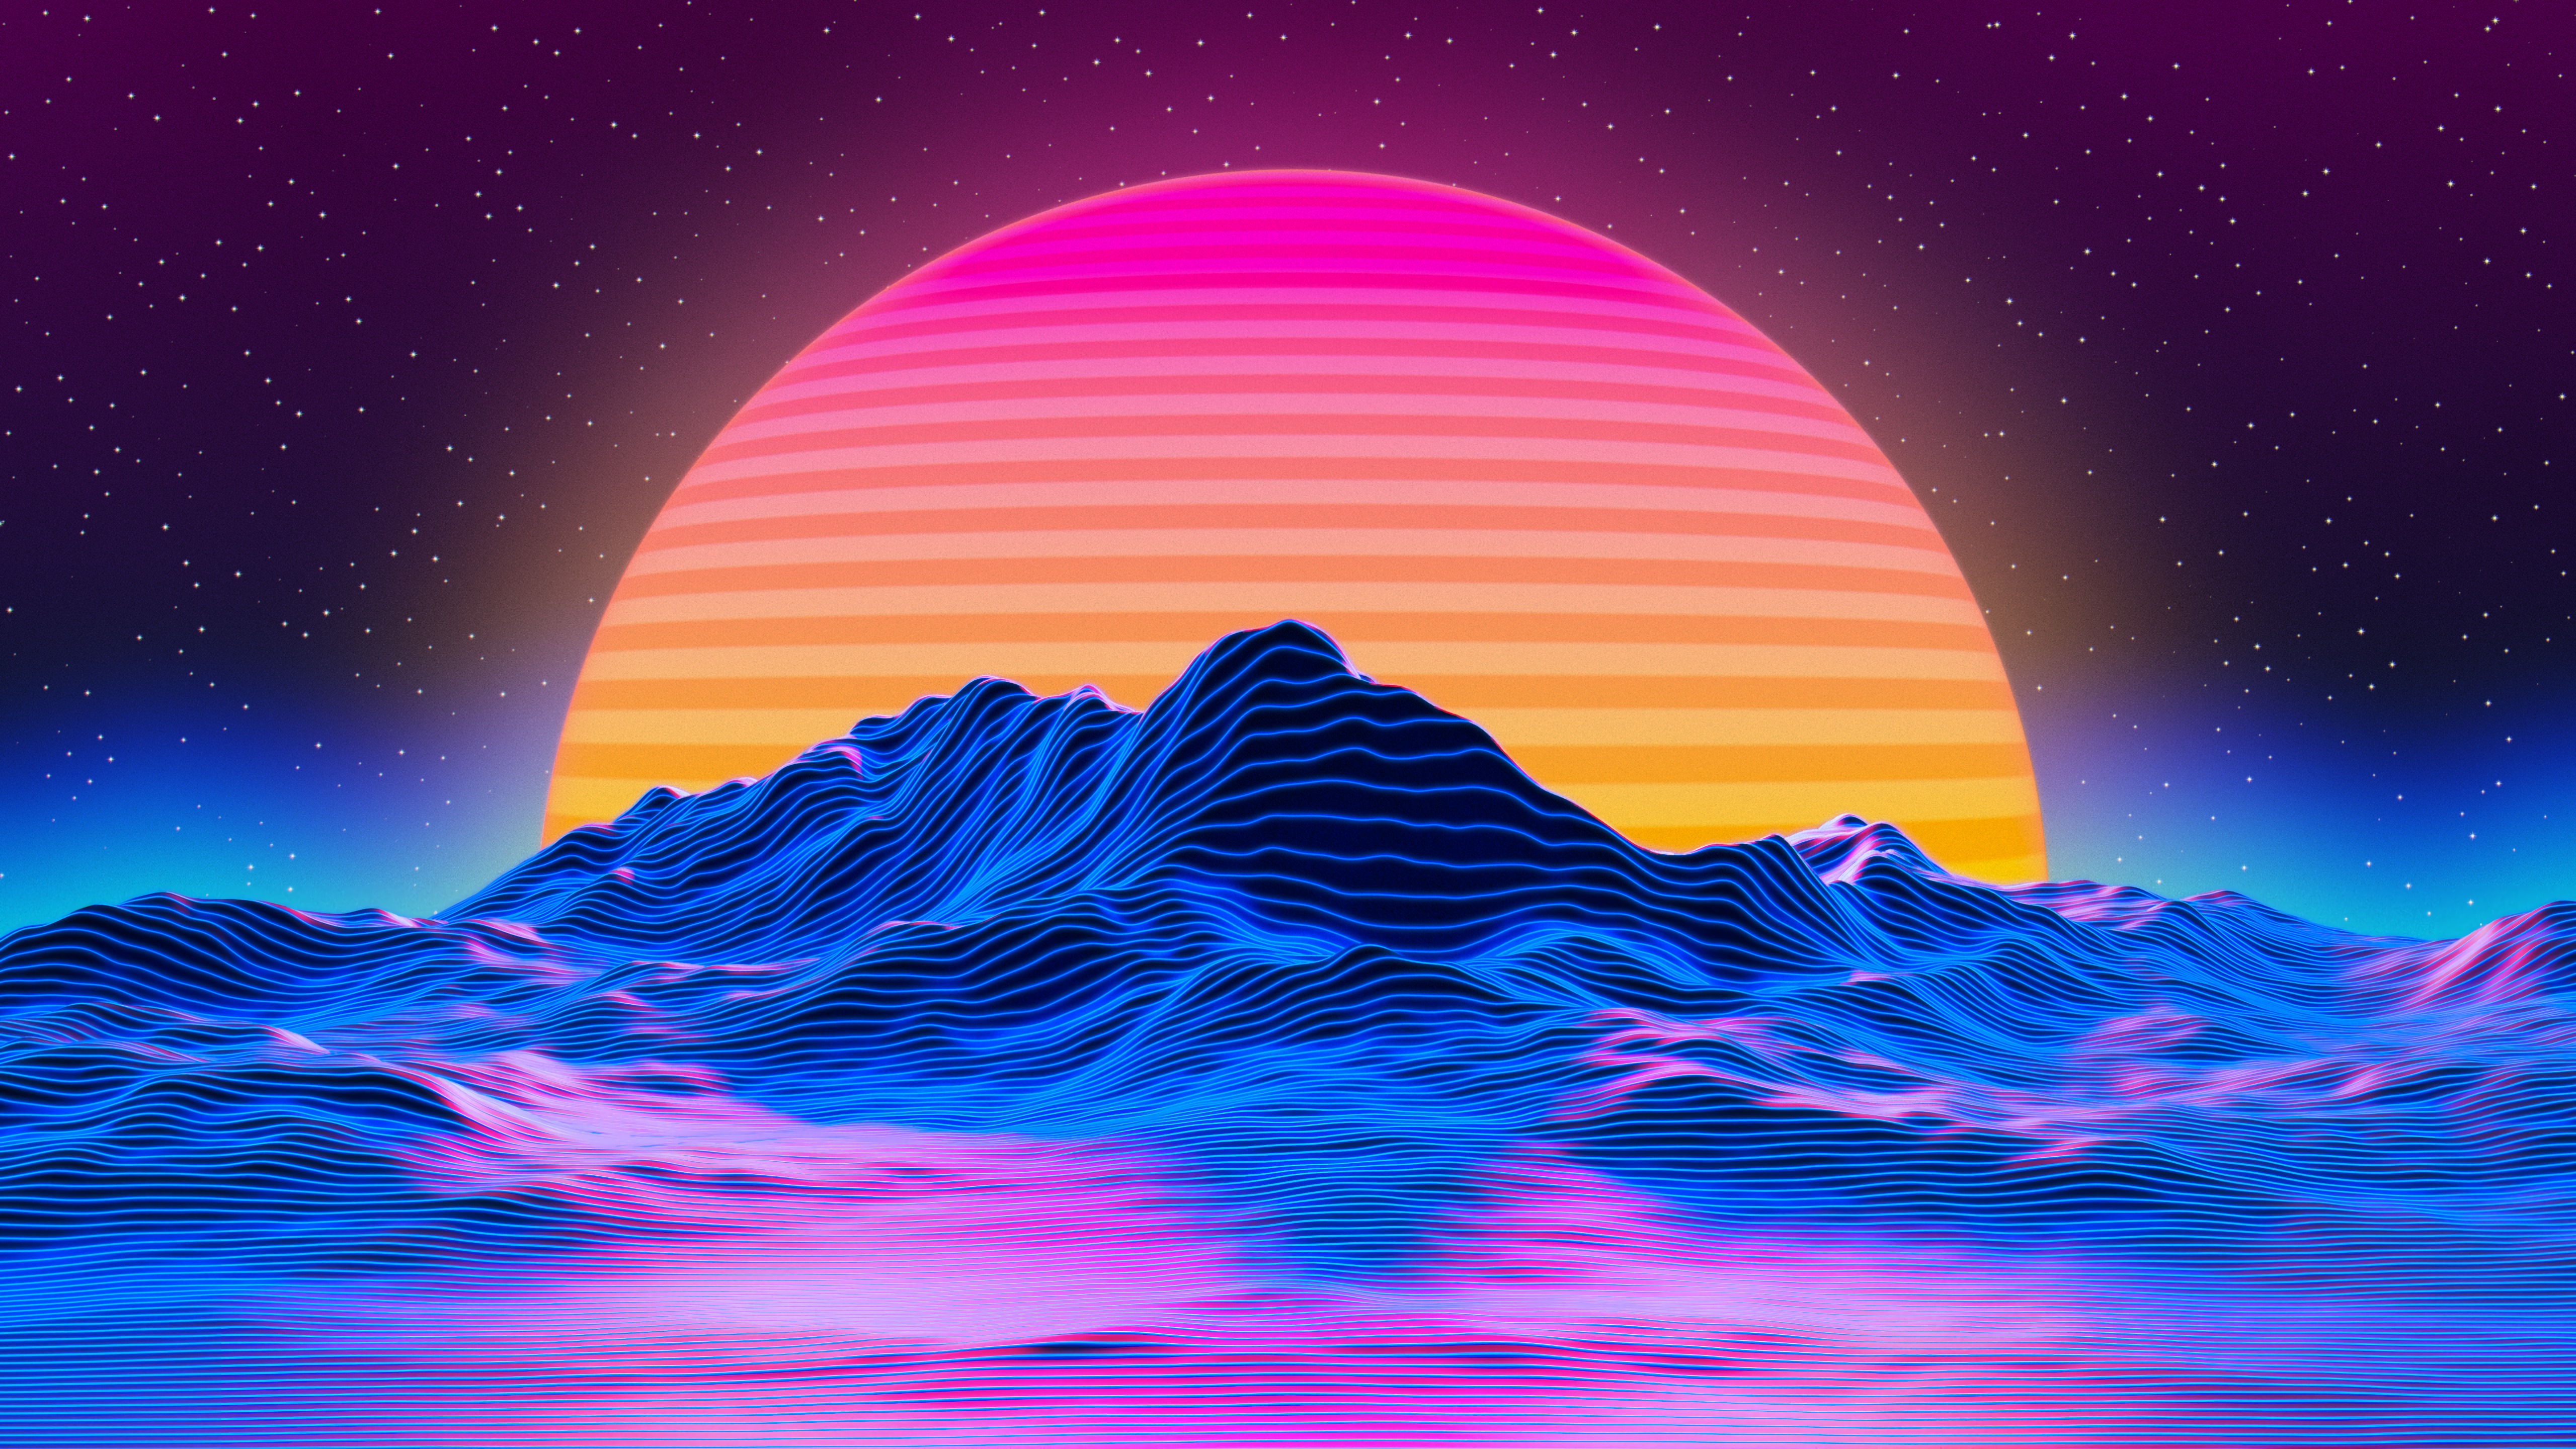 General 5120x2880 digital art artwork illustration lines sun rays sunset nature landscape glowing colorful 1980s synthwave